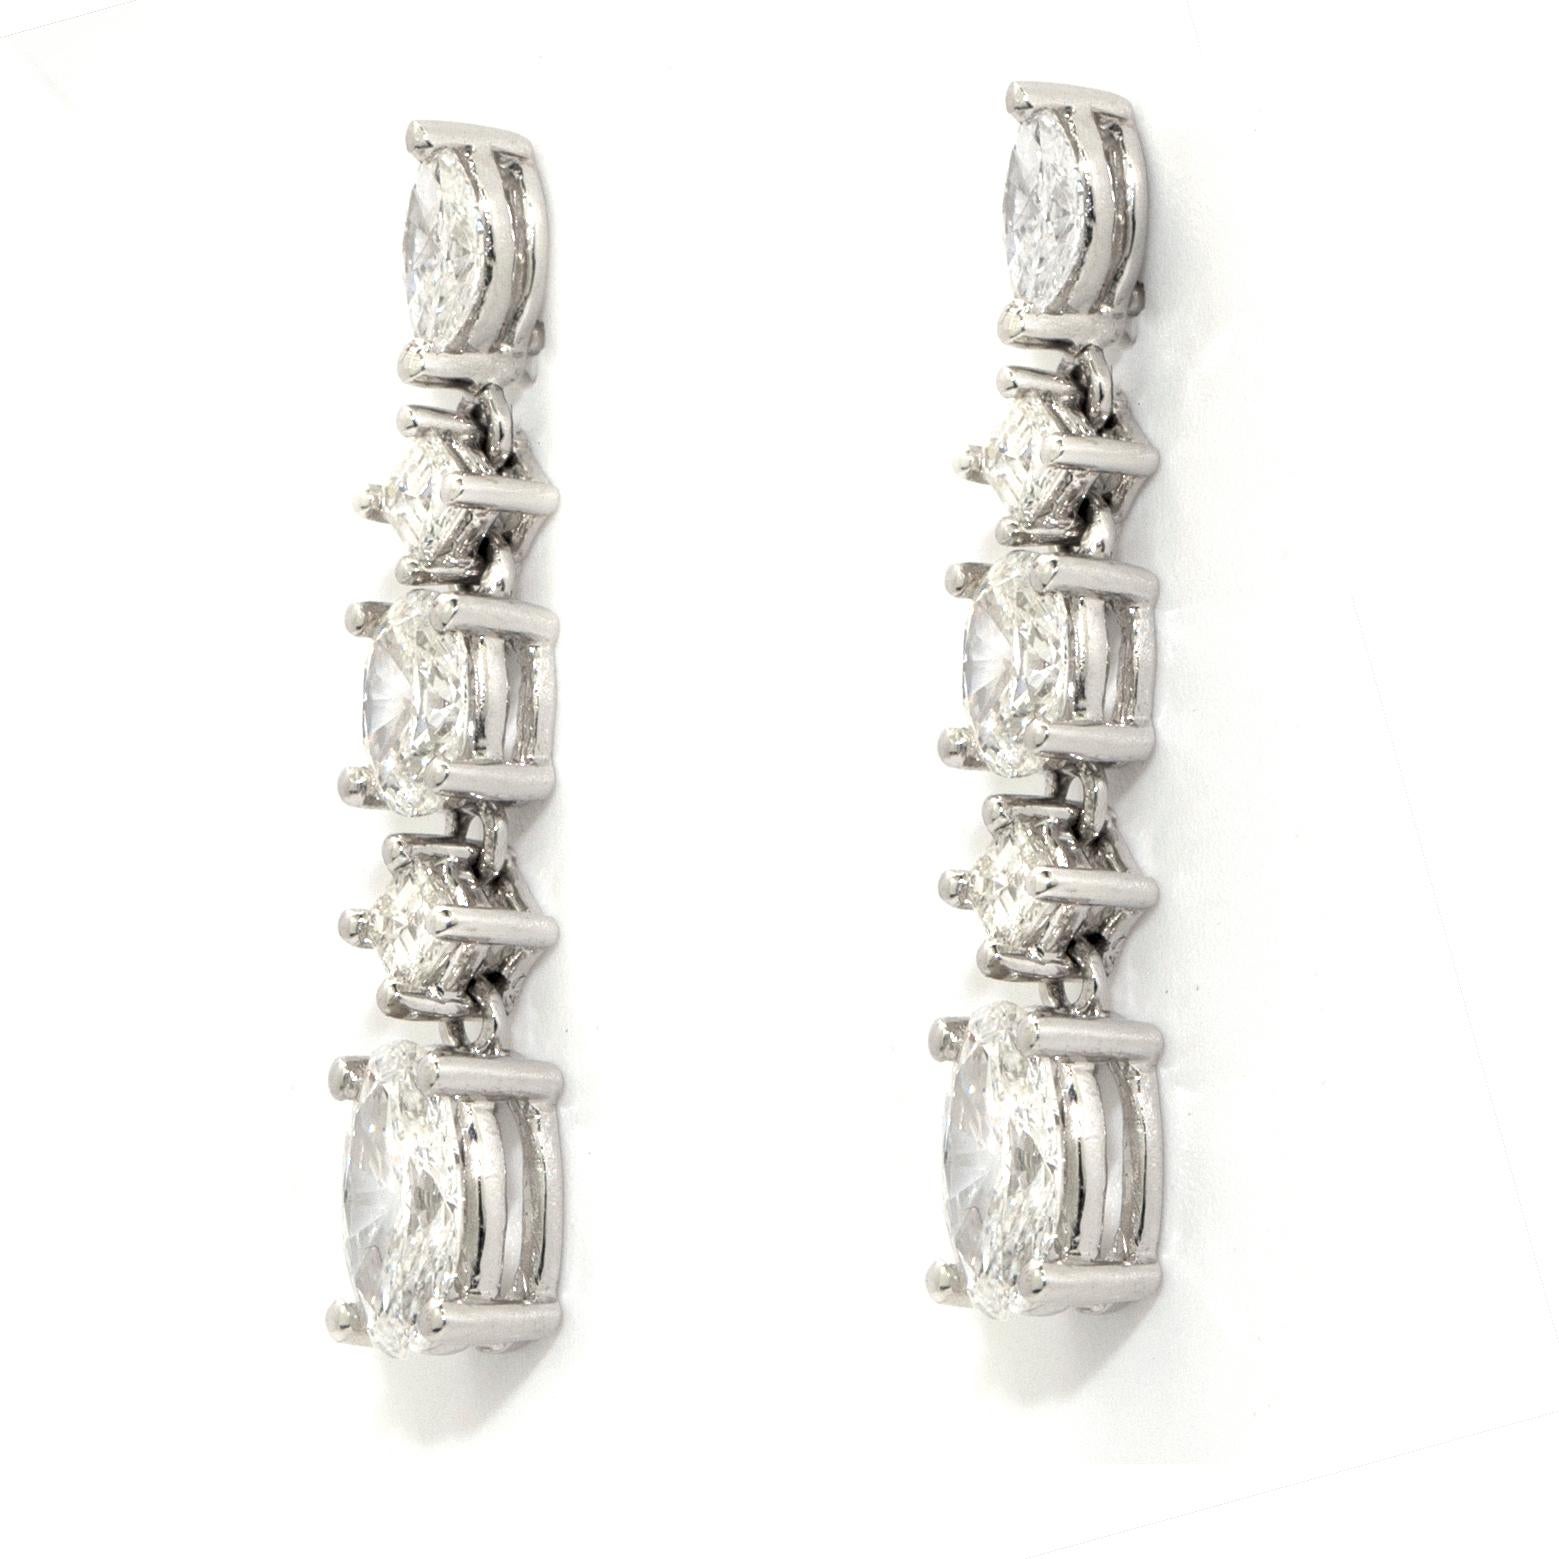 These beautiful 18 karat white gold dangling earrings features two oval diamonds of approximately 0.70ct each, two Asscher cut diamonds of approximately 0.35ct each and two marquize cut diamonds of approximately 0.20ct each. 

4.45 grams
3cm